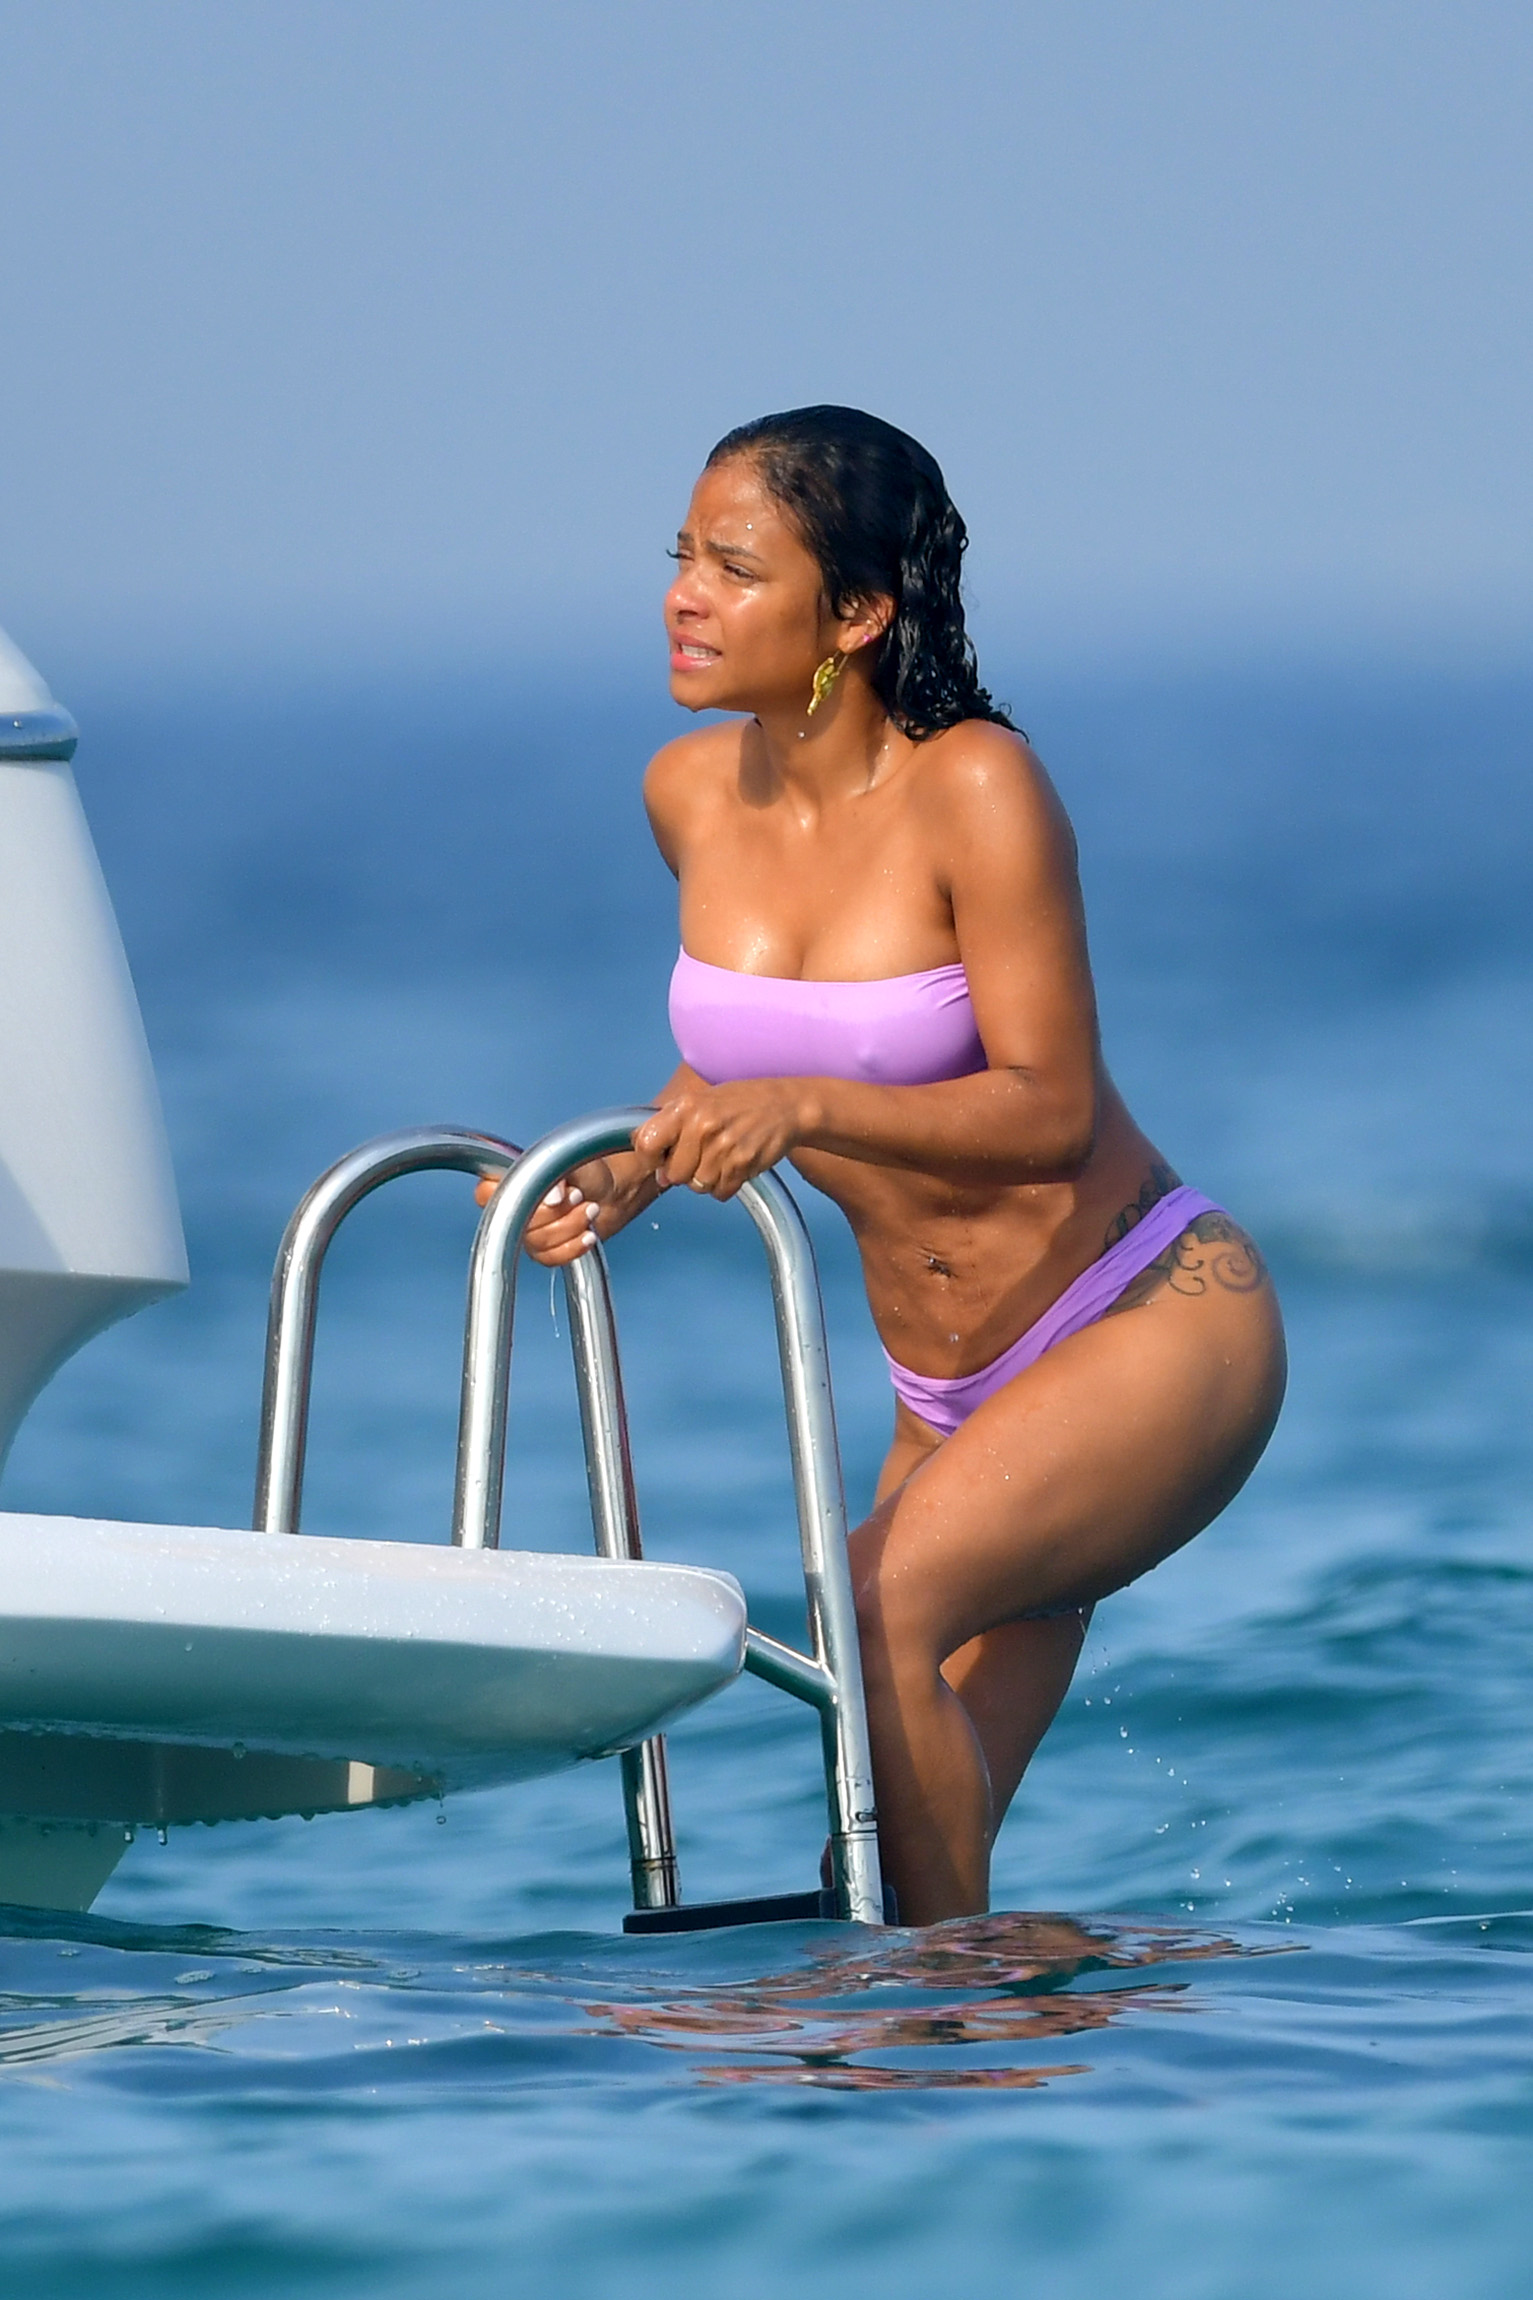 Christina Milian pokies and cameltoe in sexy bikini candids on a boat during holiday UHQ (50).jpg